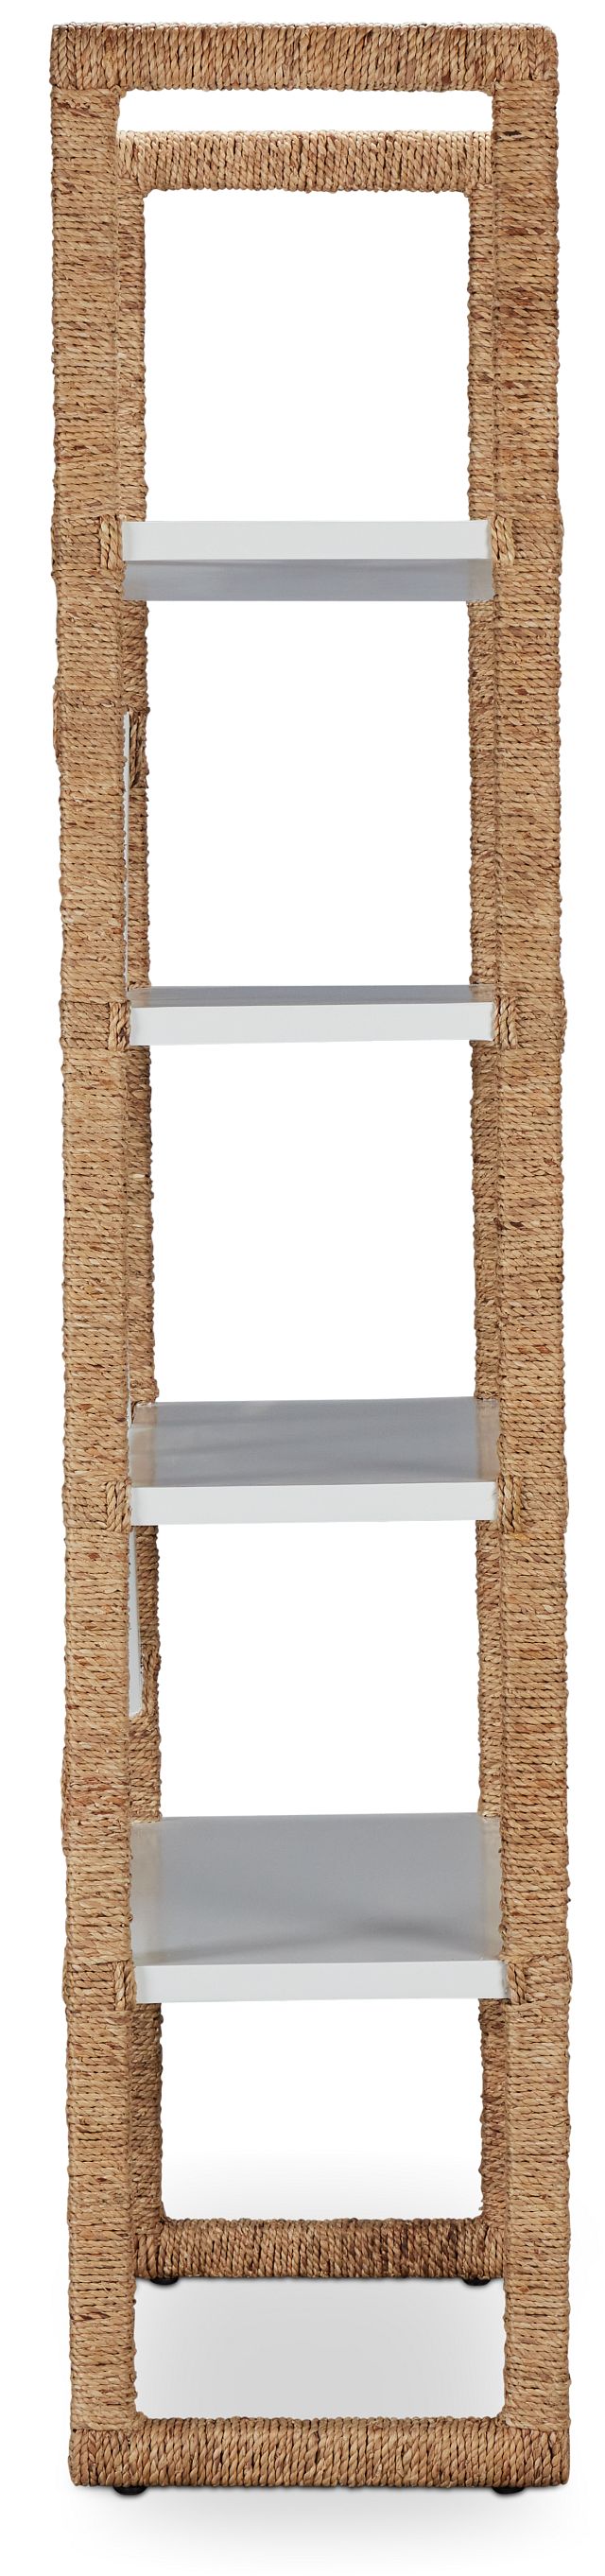 Marley Light Tone Woven Bookcase